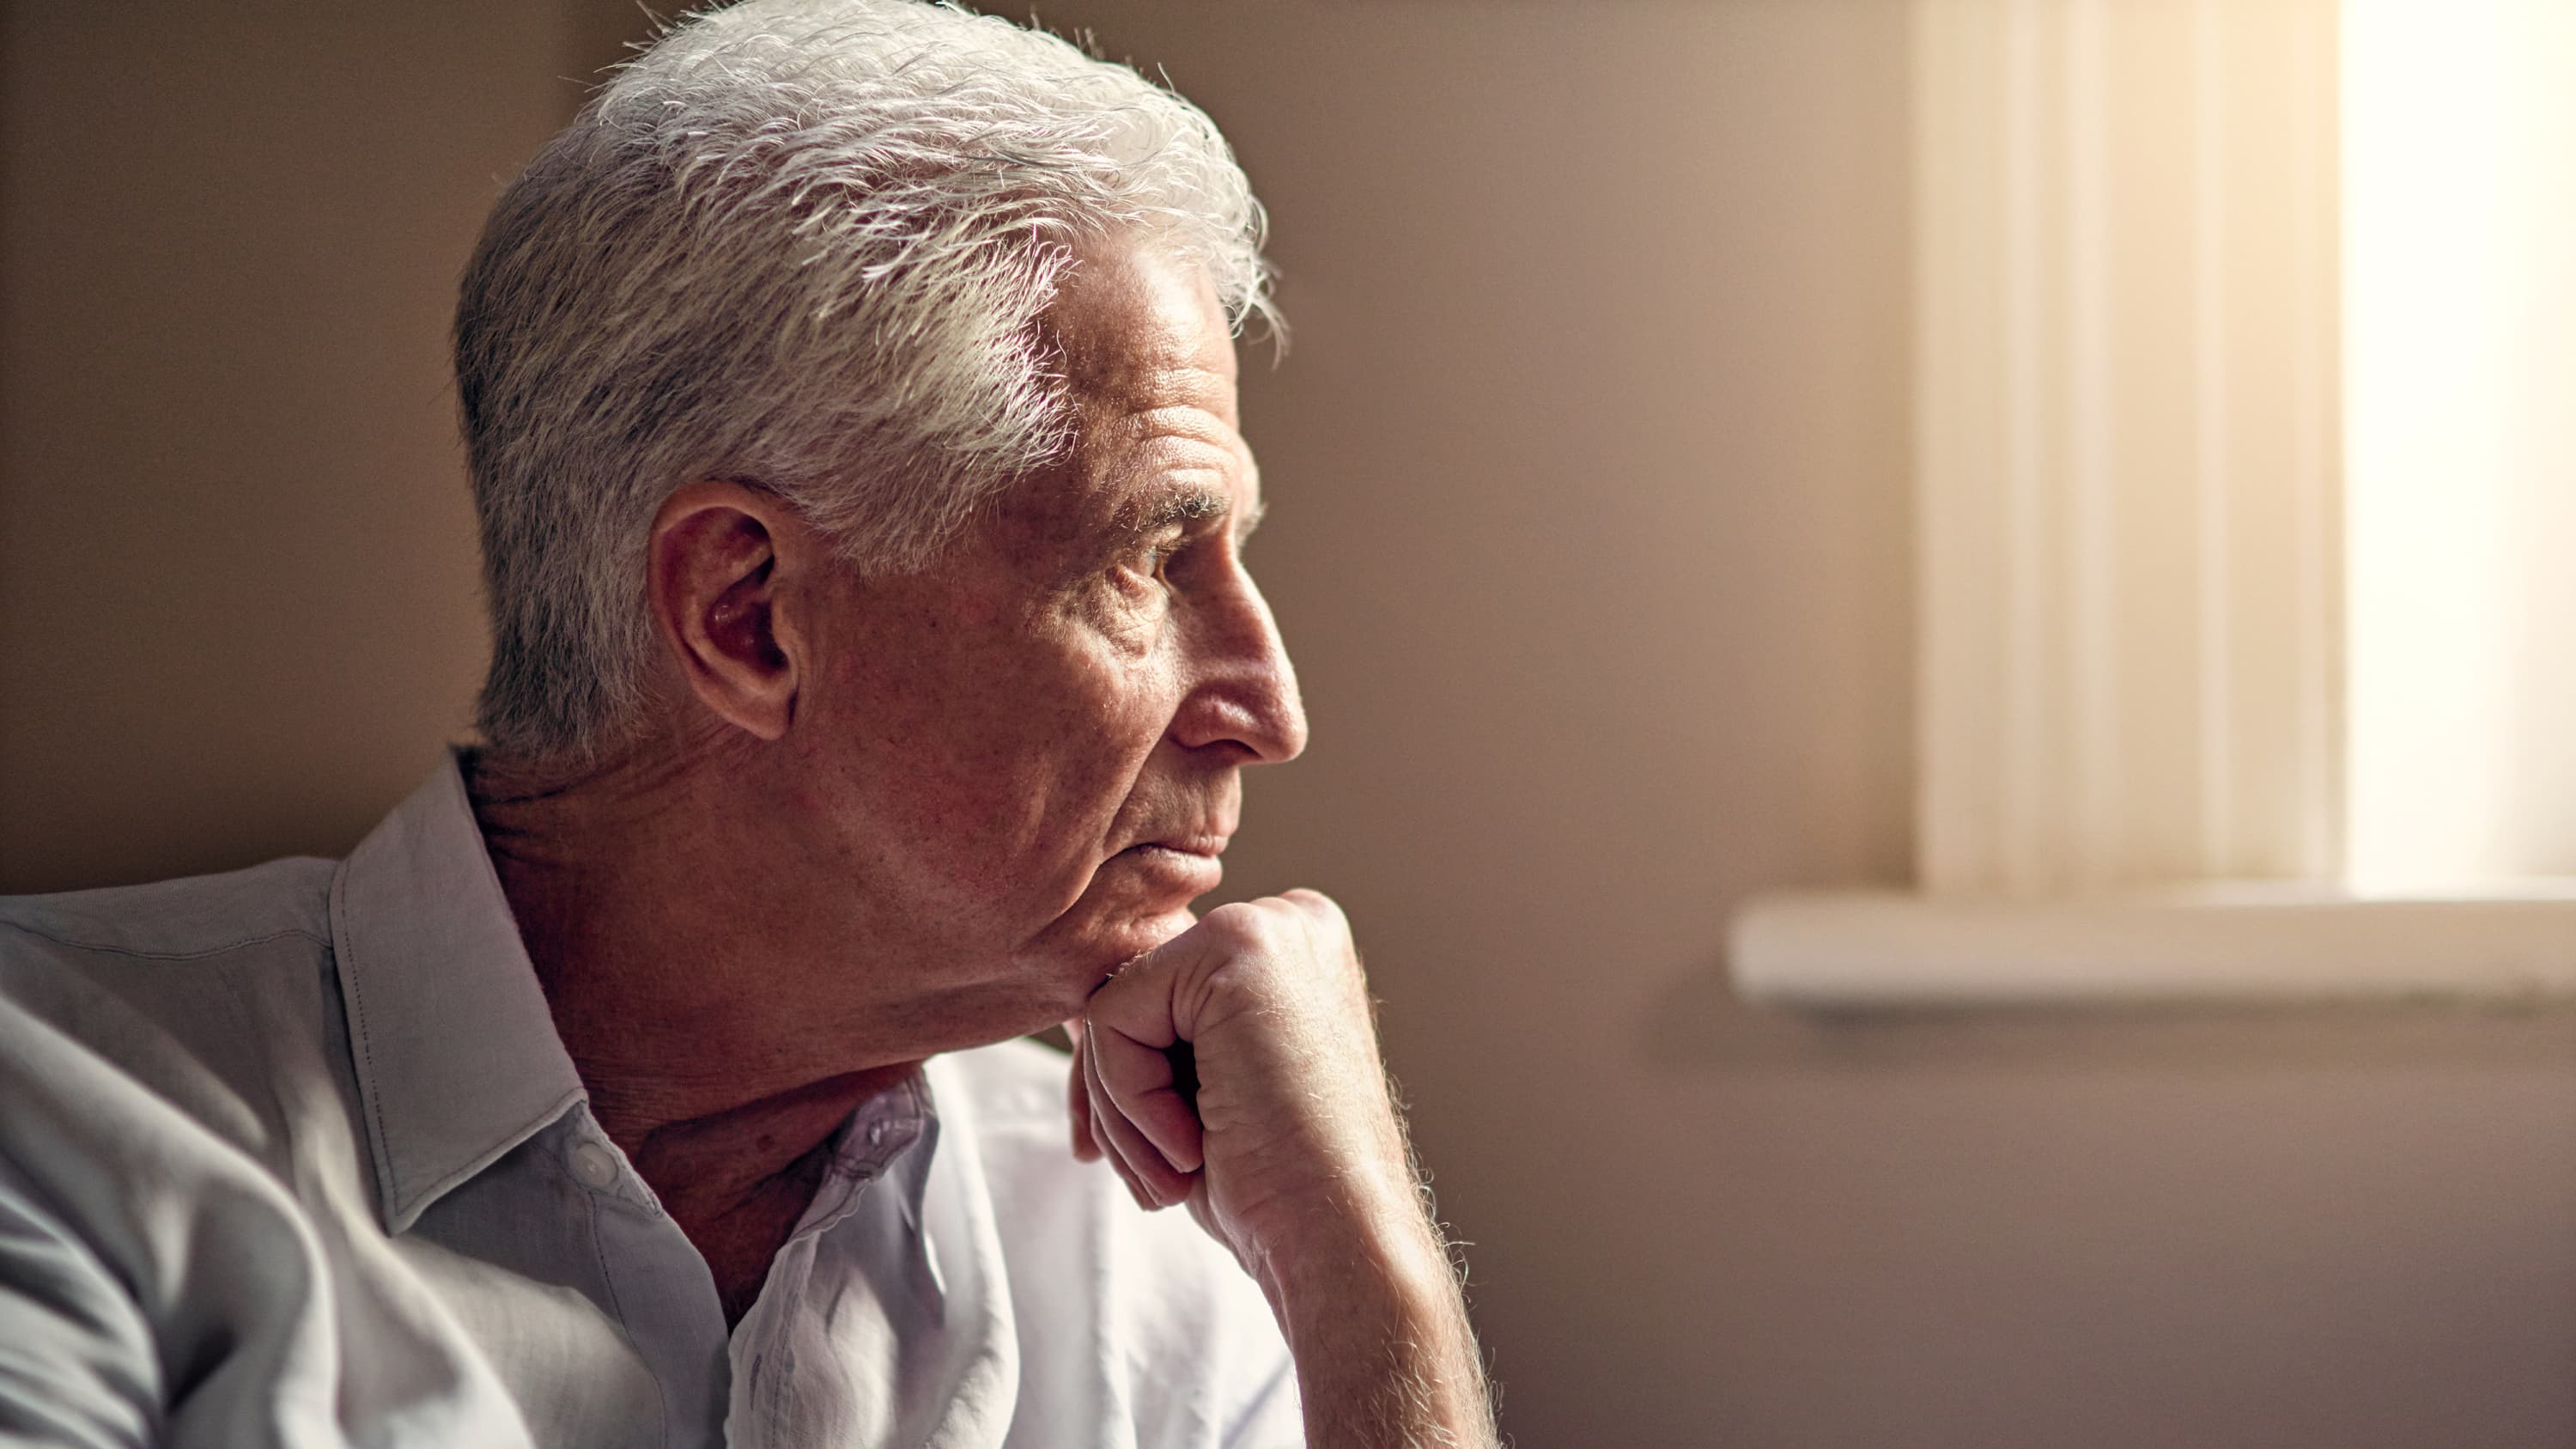 An elderly gentlemen looks out a window, who may be worried about pancreatic cancer.